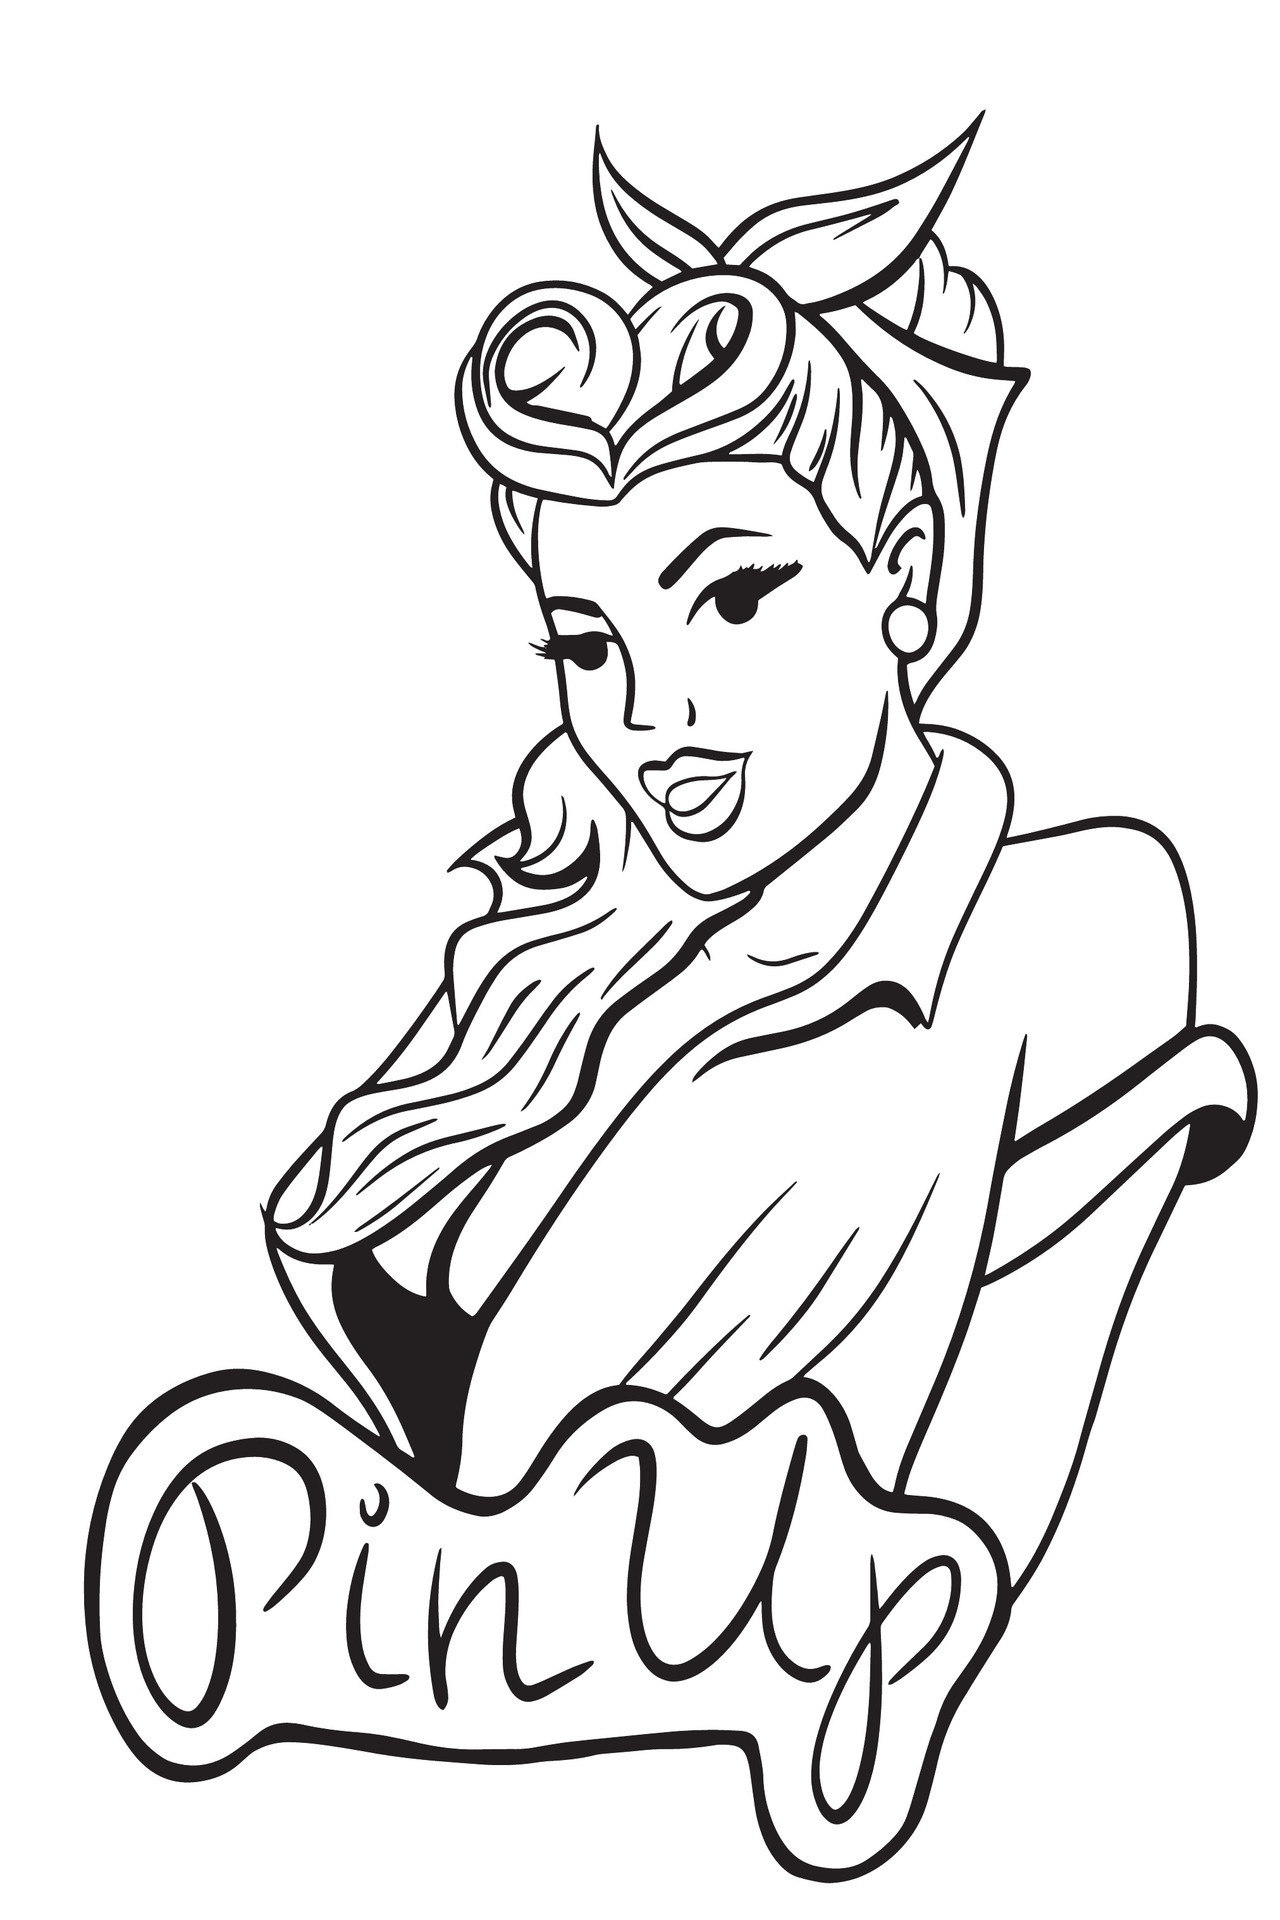 deloise alexander recommends pin up girl coloring pages pic